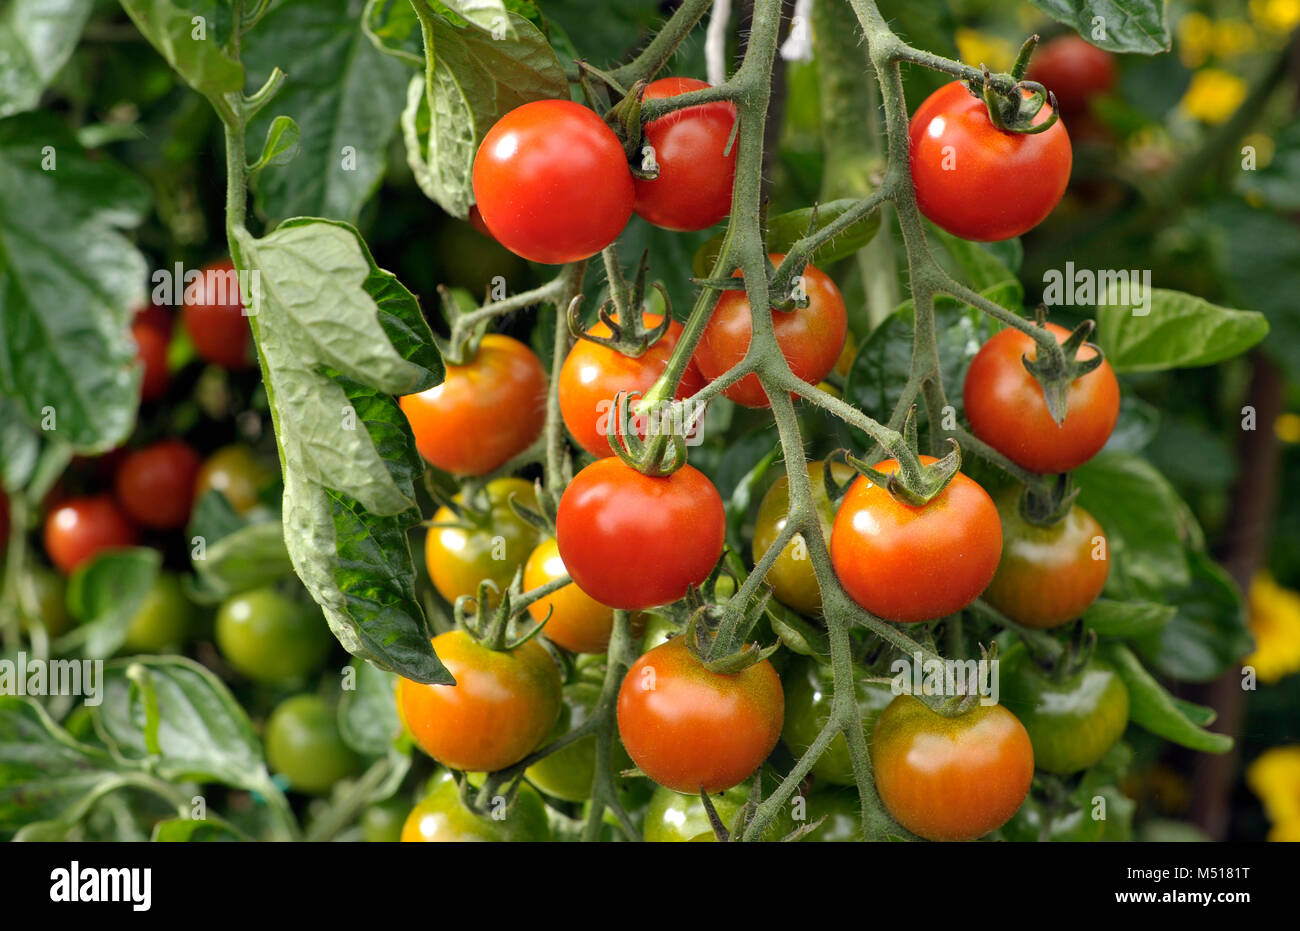 Cherry tomatoes, F1 Sweet Million, ripening on the plant in a vegetable garden. Stock Photo